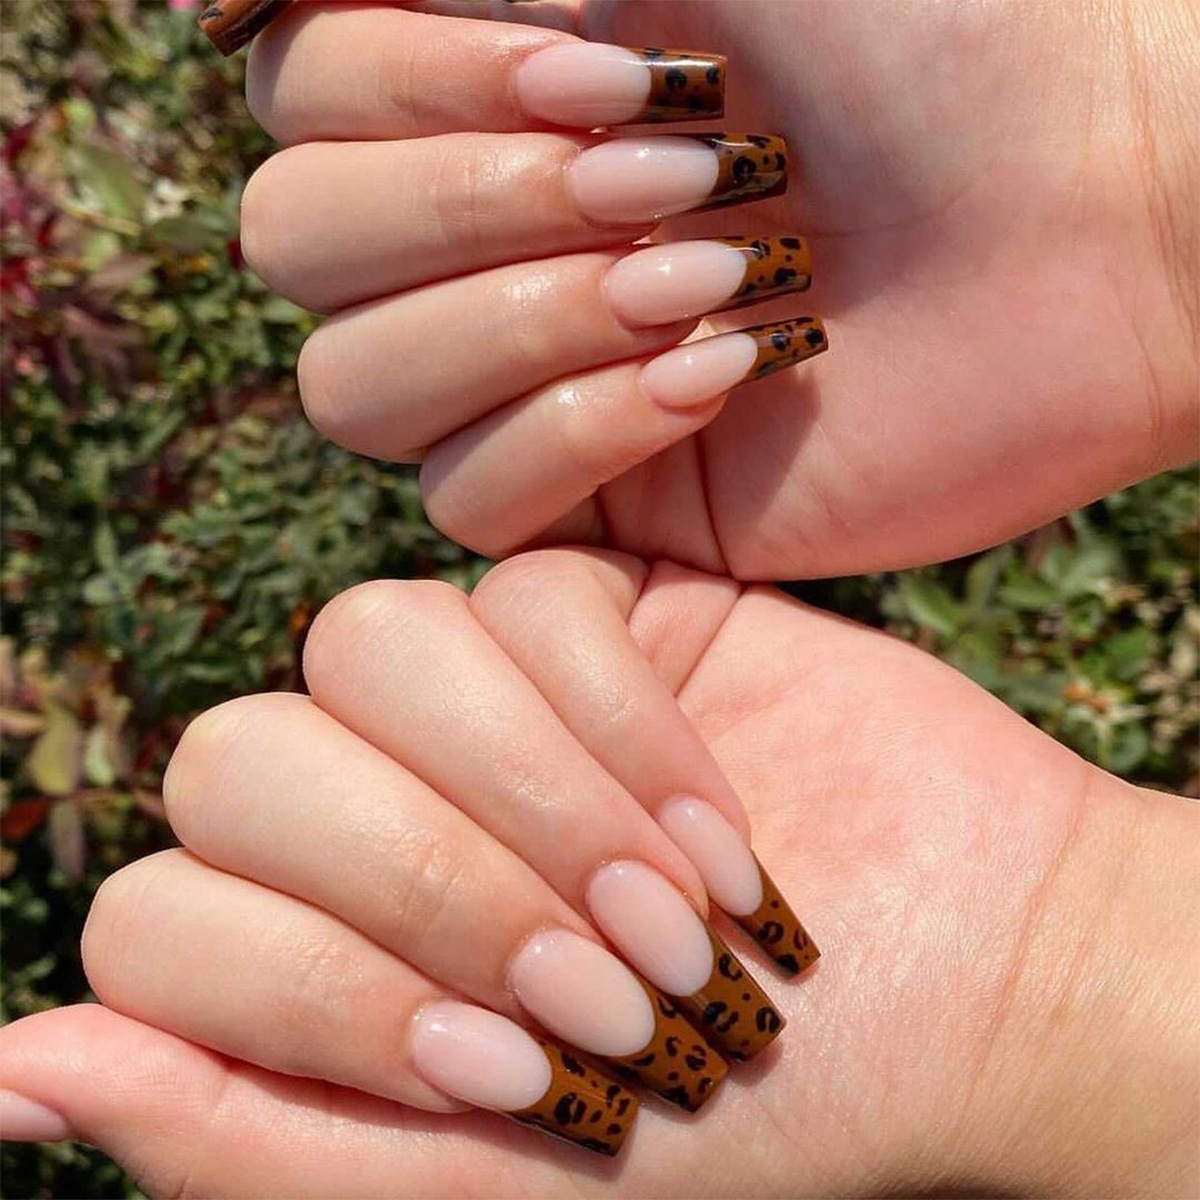 JP1089 Glossy Press on Nails, Super Long Coffin Nude Leopard Prints Brown French Style Fake Nails, Full Cover Artificial False Nails for Women and Girls
